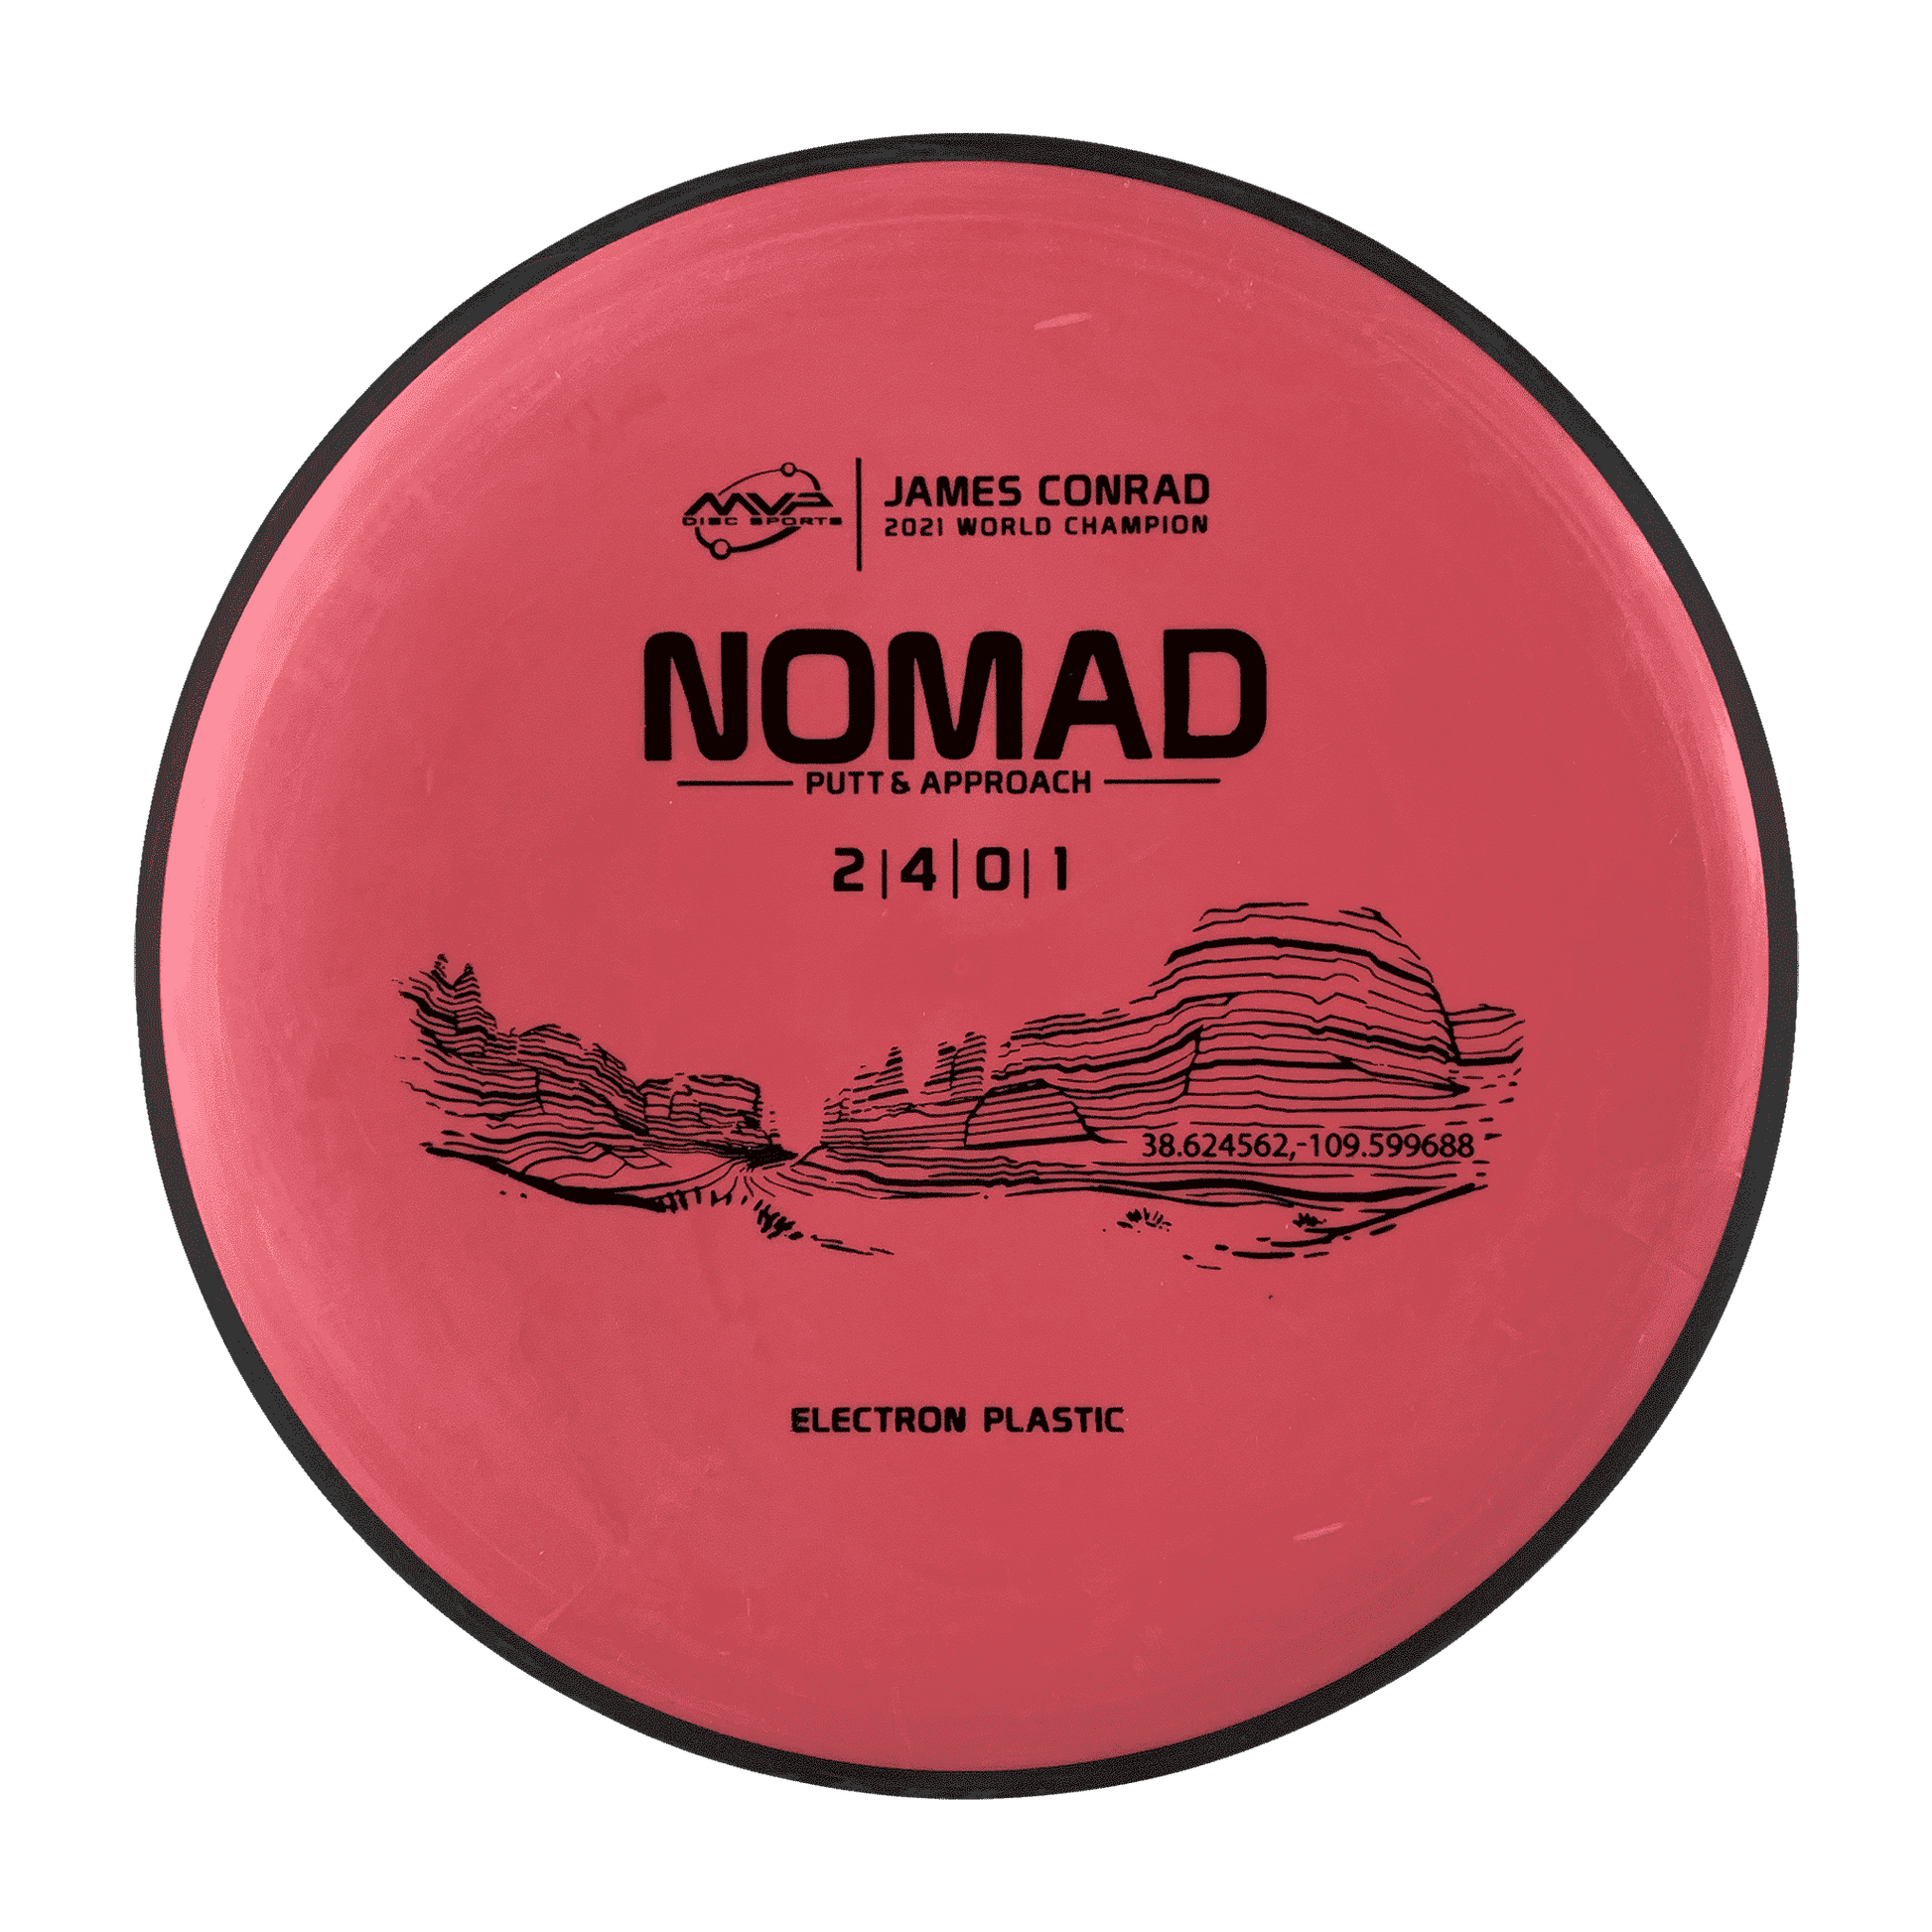 Electron Firm Nomad - James Conrad 2021 World Champion Disc MVP red 173 